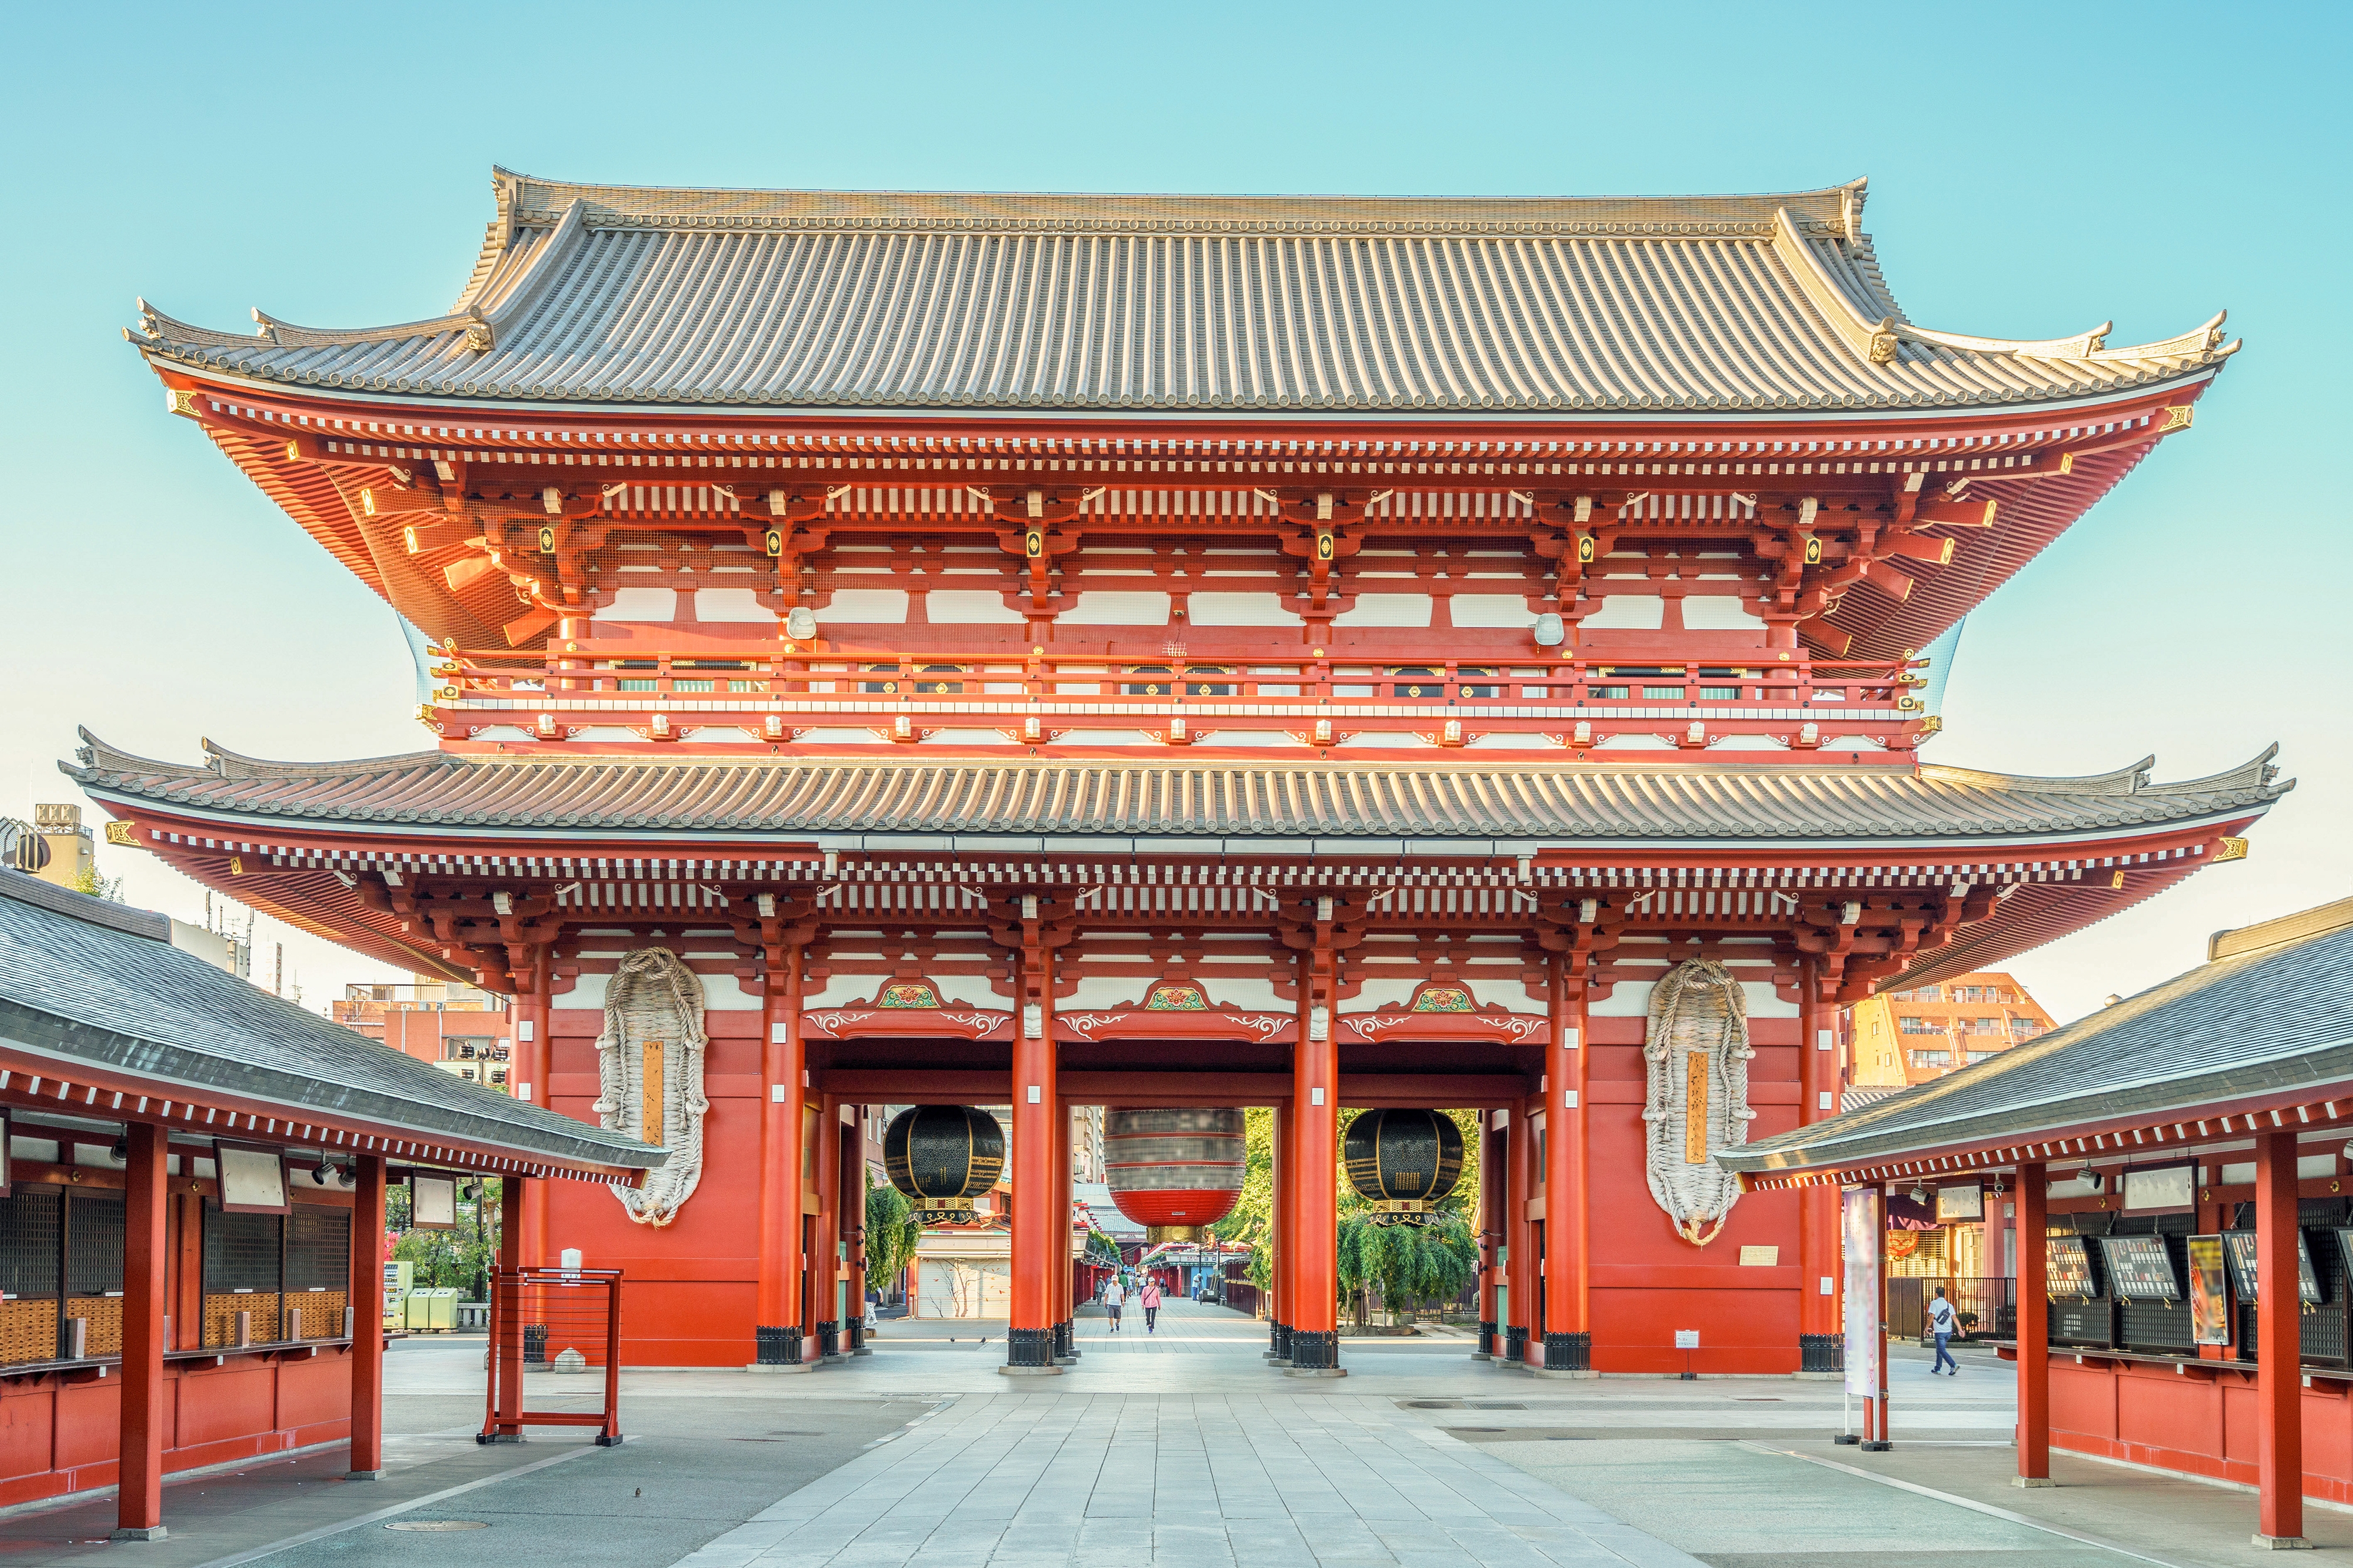 Delve into the heart of the Senso-ji district, where a 628-year-old temple stands as a cultural beacon